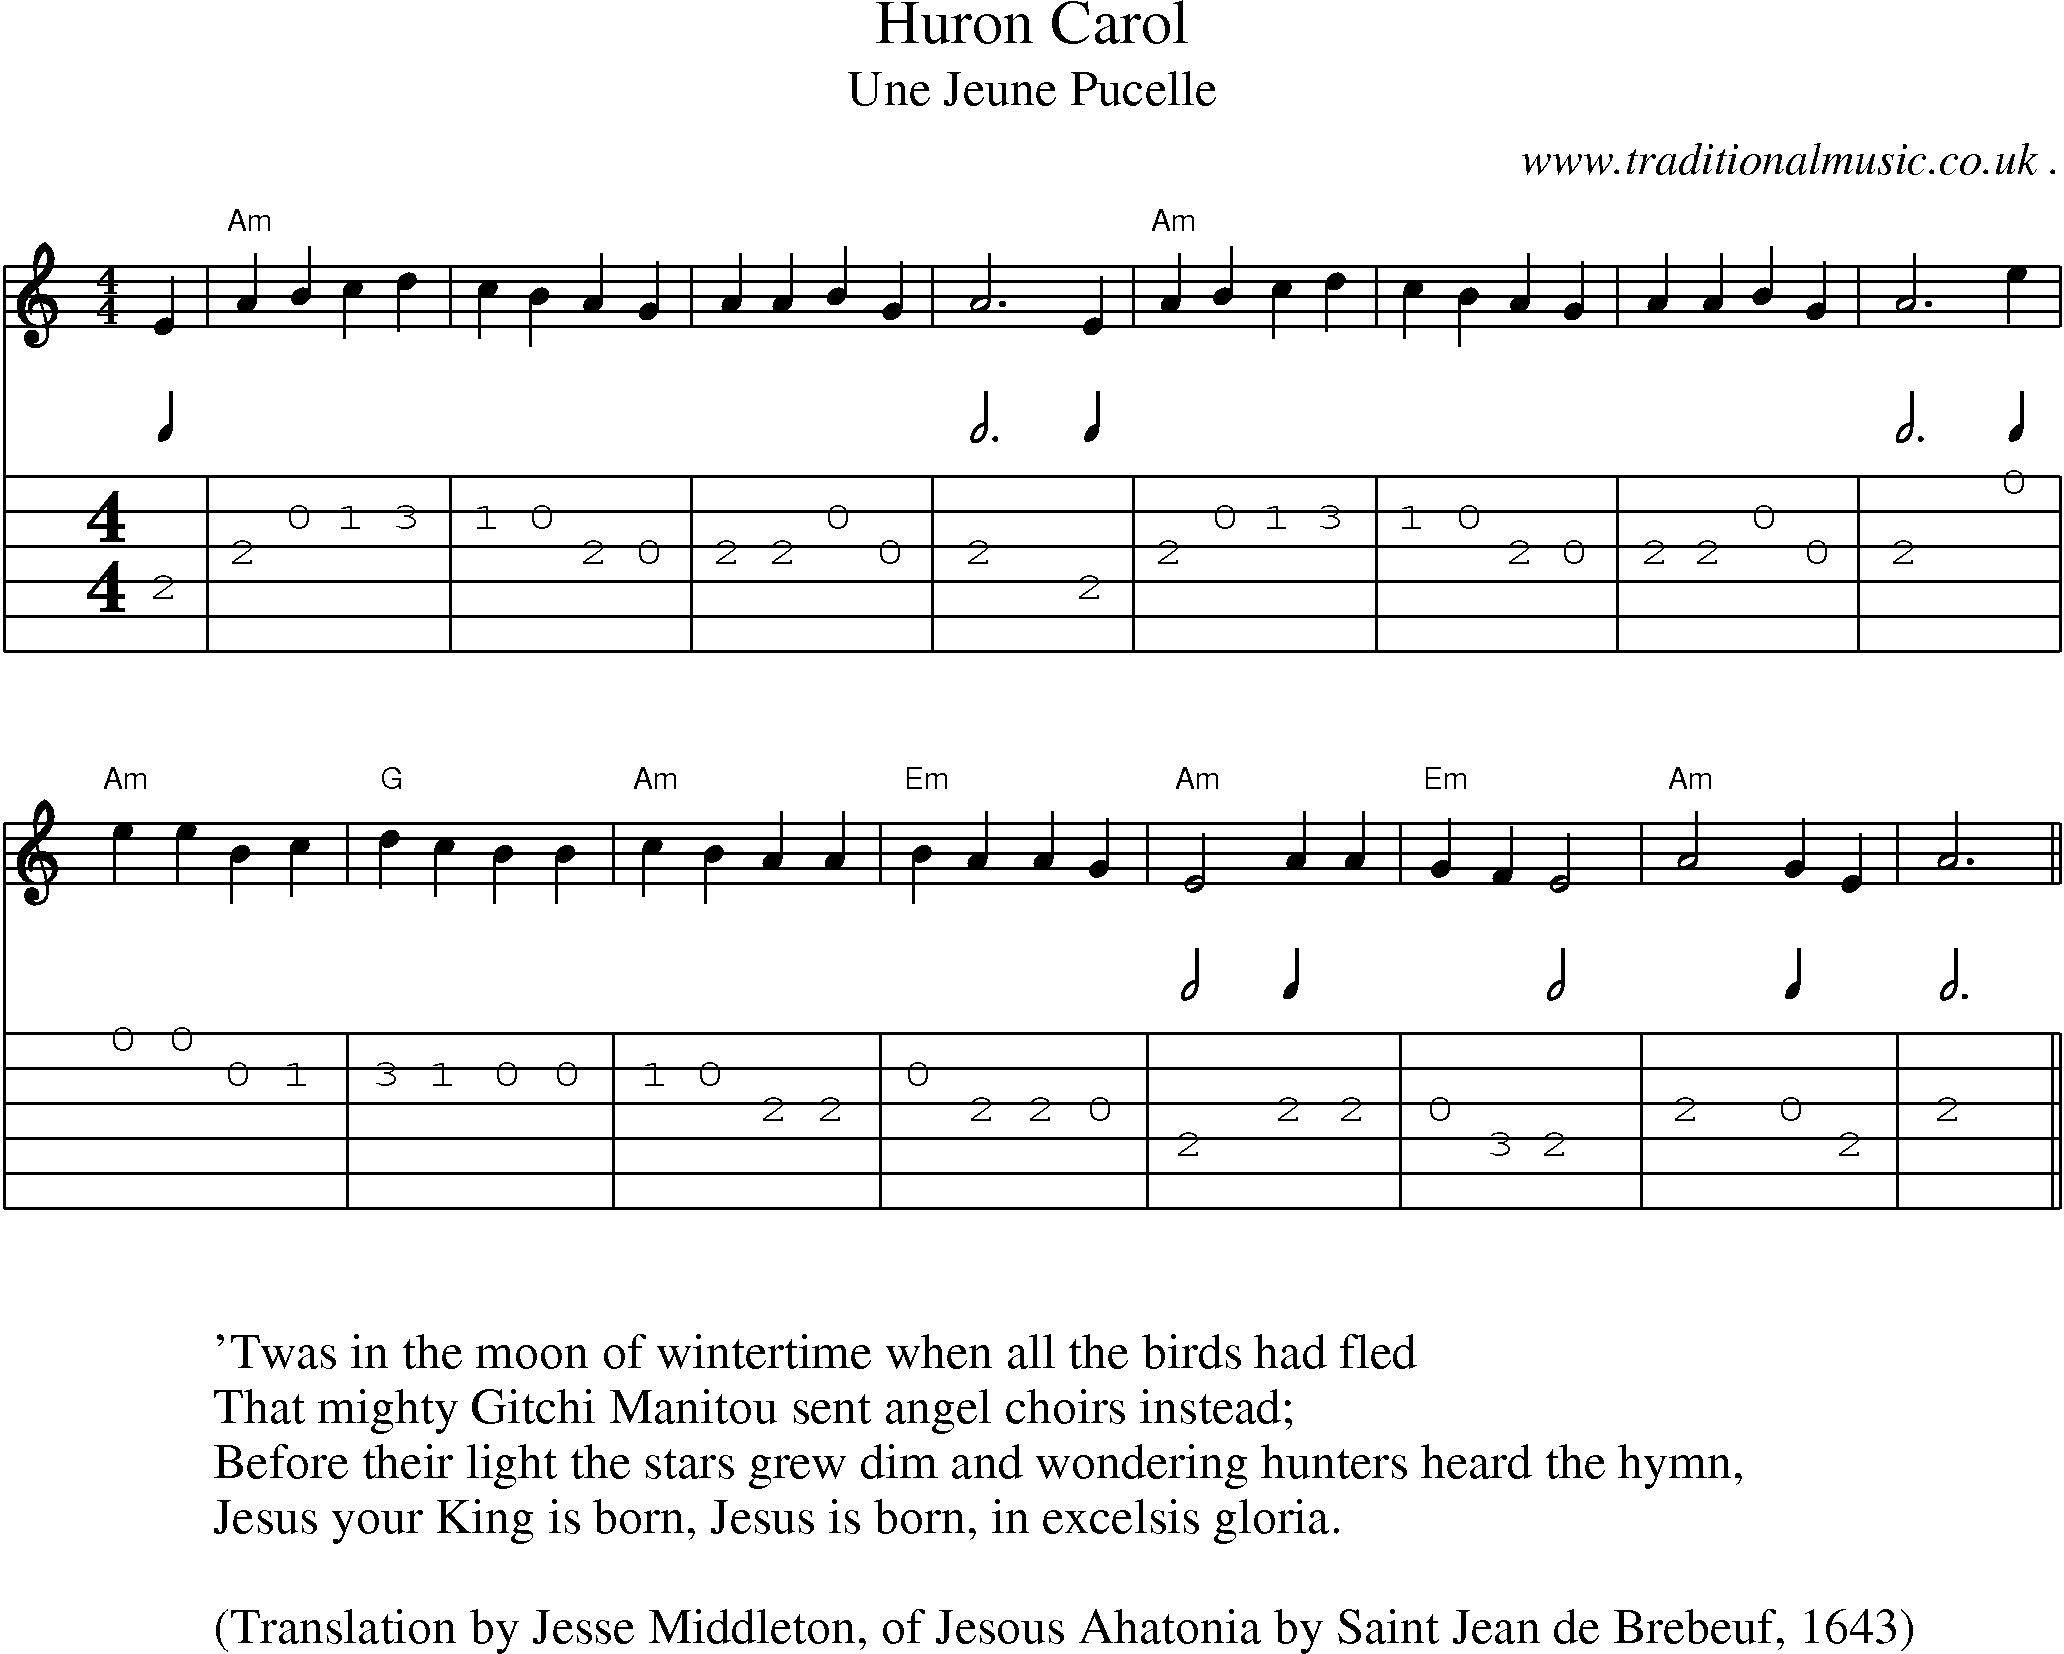 Music Score and Guitar Tabs for Huron Carol